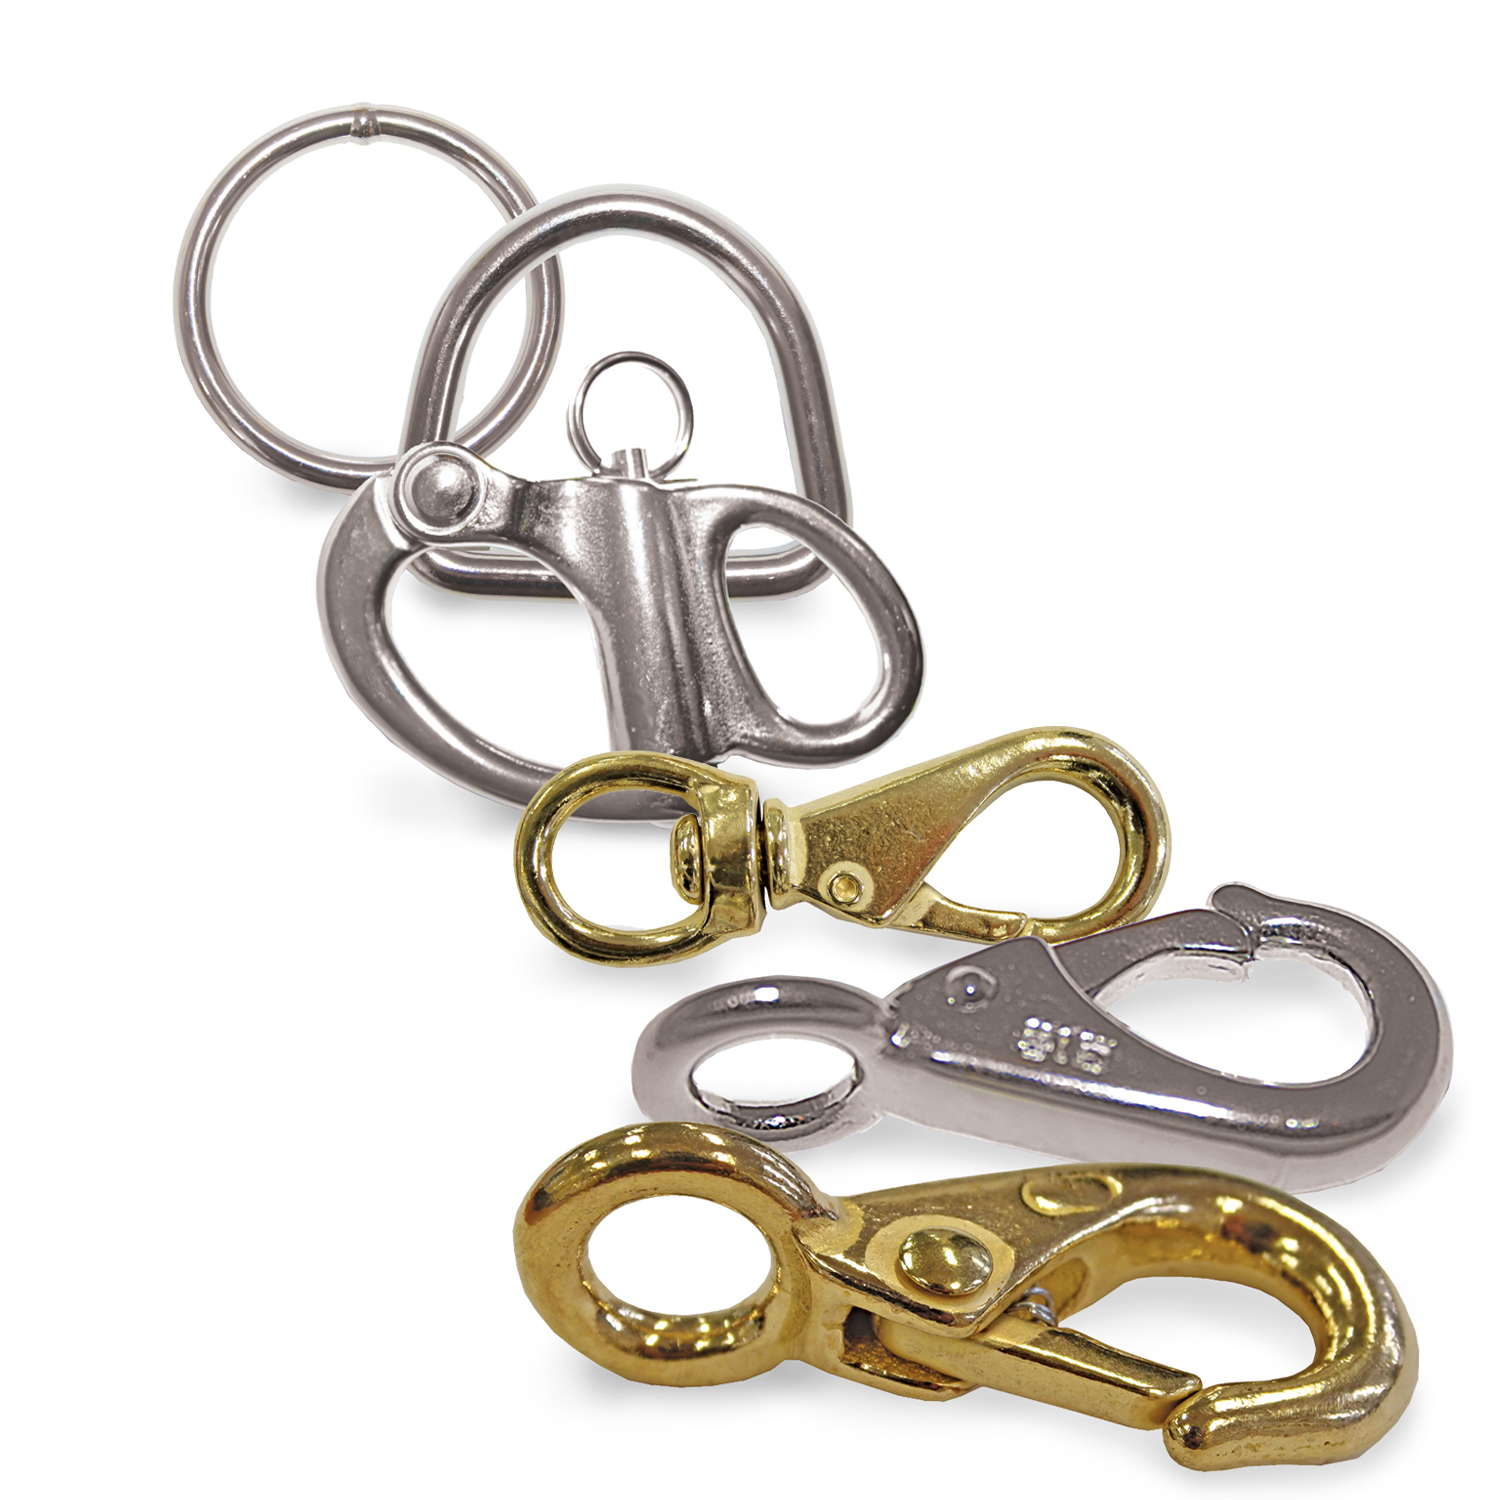 Product category - Rings & Snap - Shackles